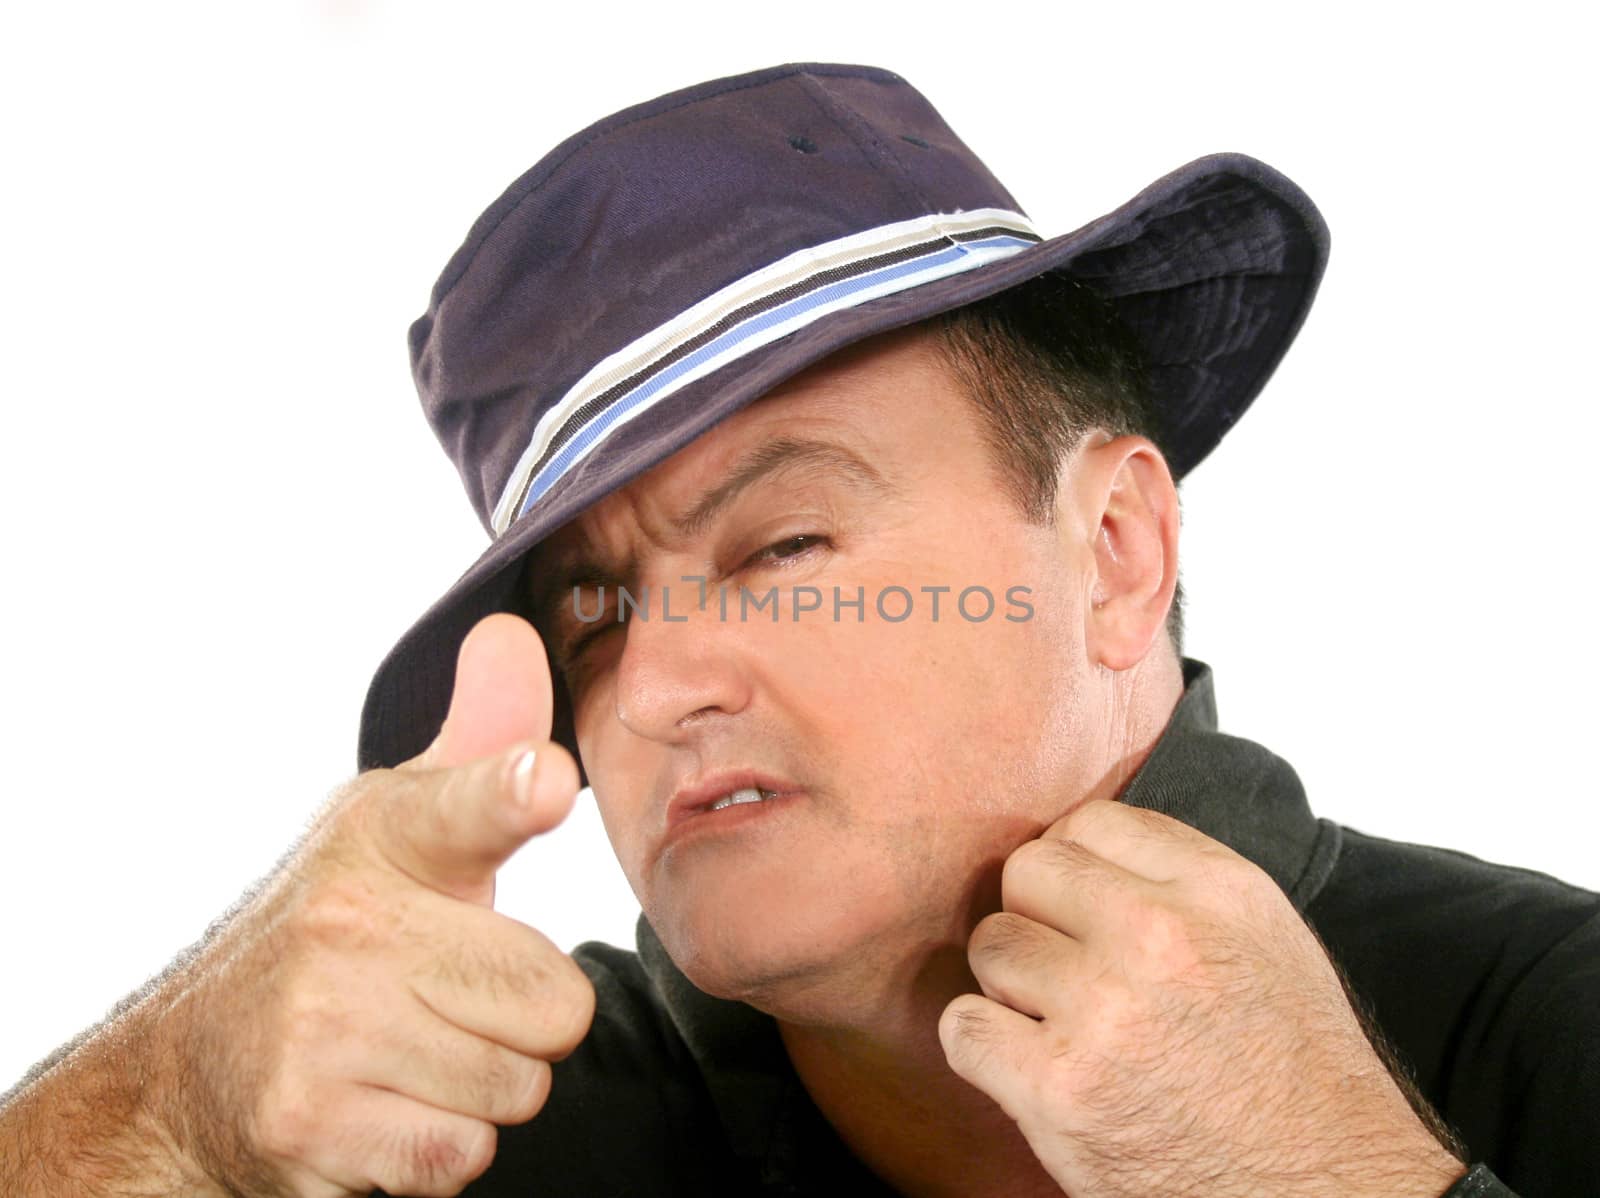 Confident man in hat looking at camera and pointing.